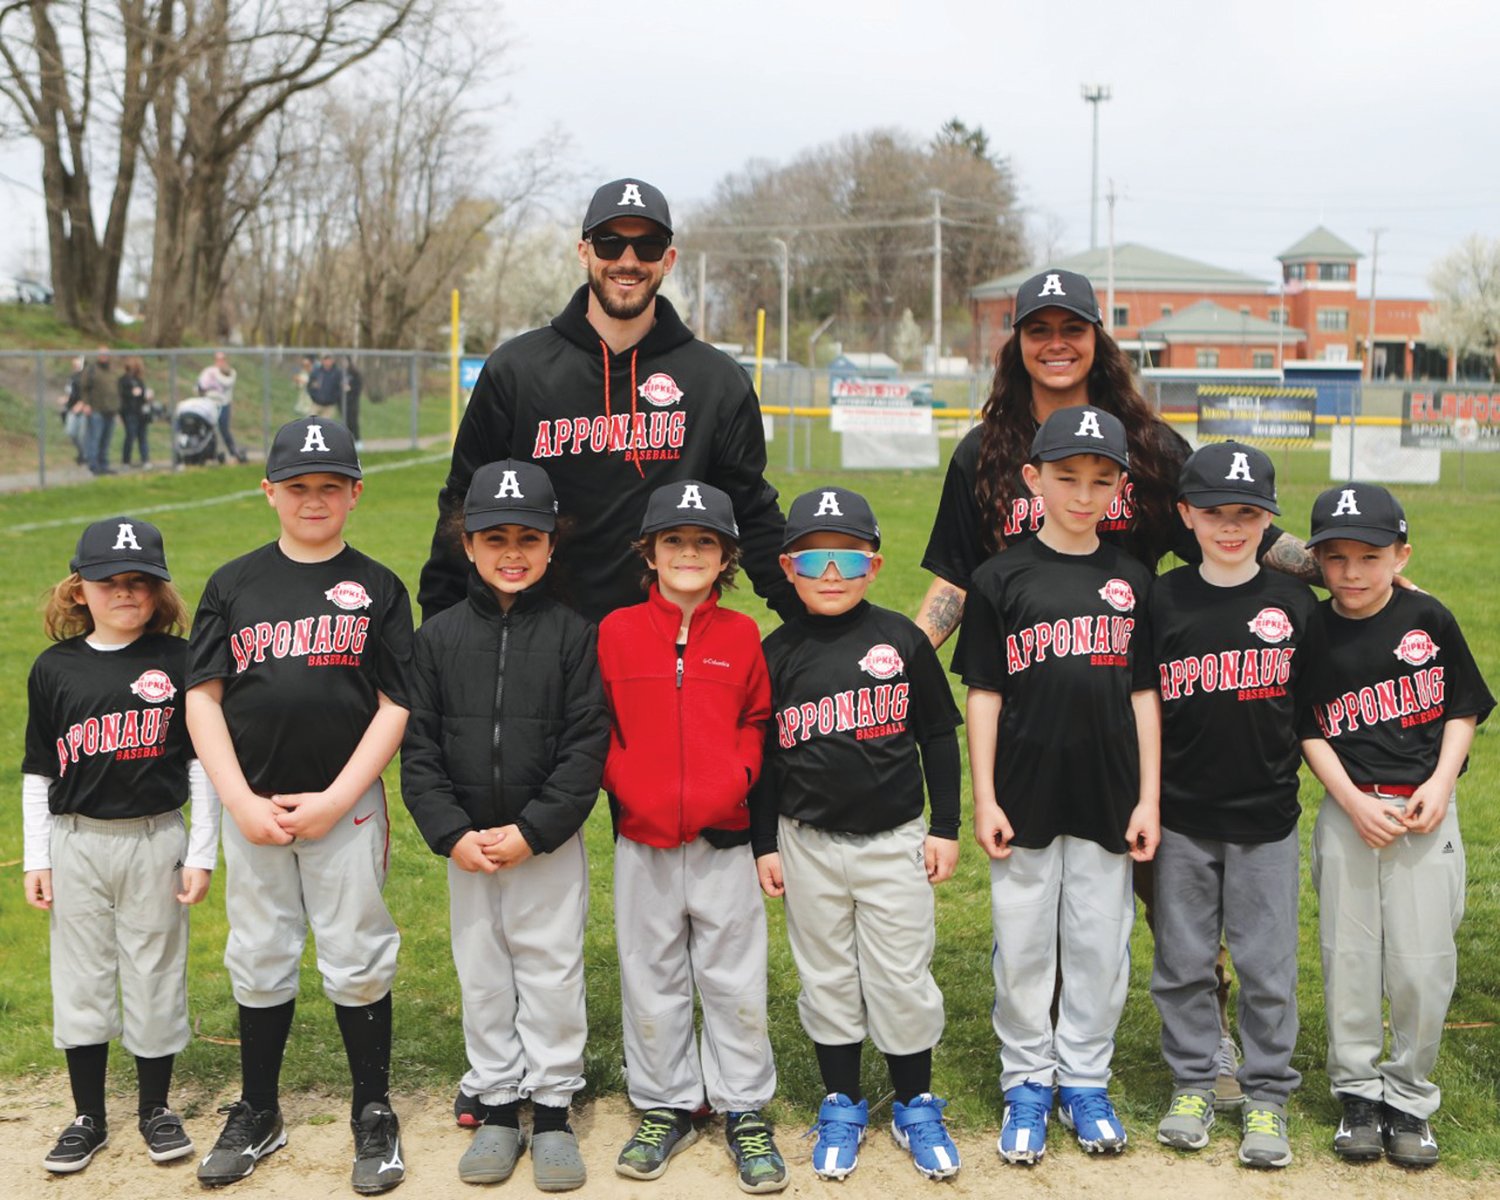 TEAM WORK: Apponaug’s Northeast Baseball Training team gathers for a group photo prior to the first pitch on Opening Day last Saturday at the league’s complex in Warwick.